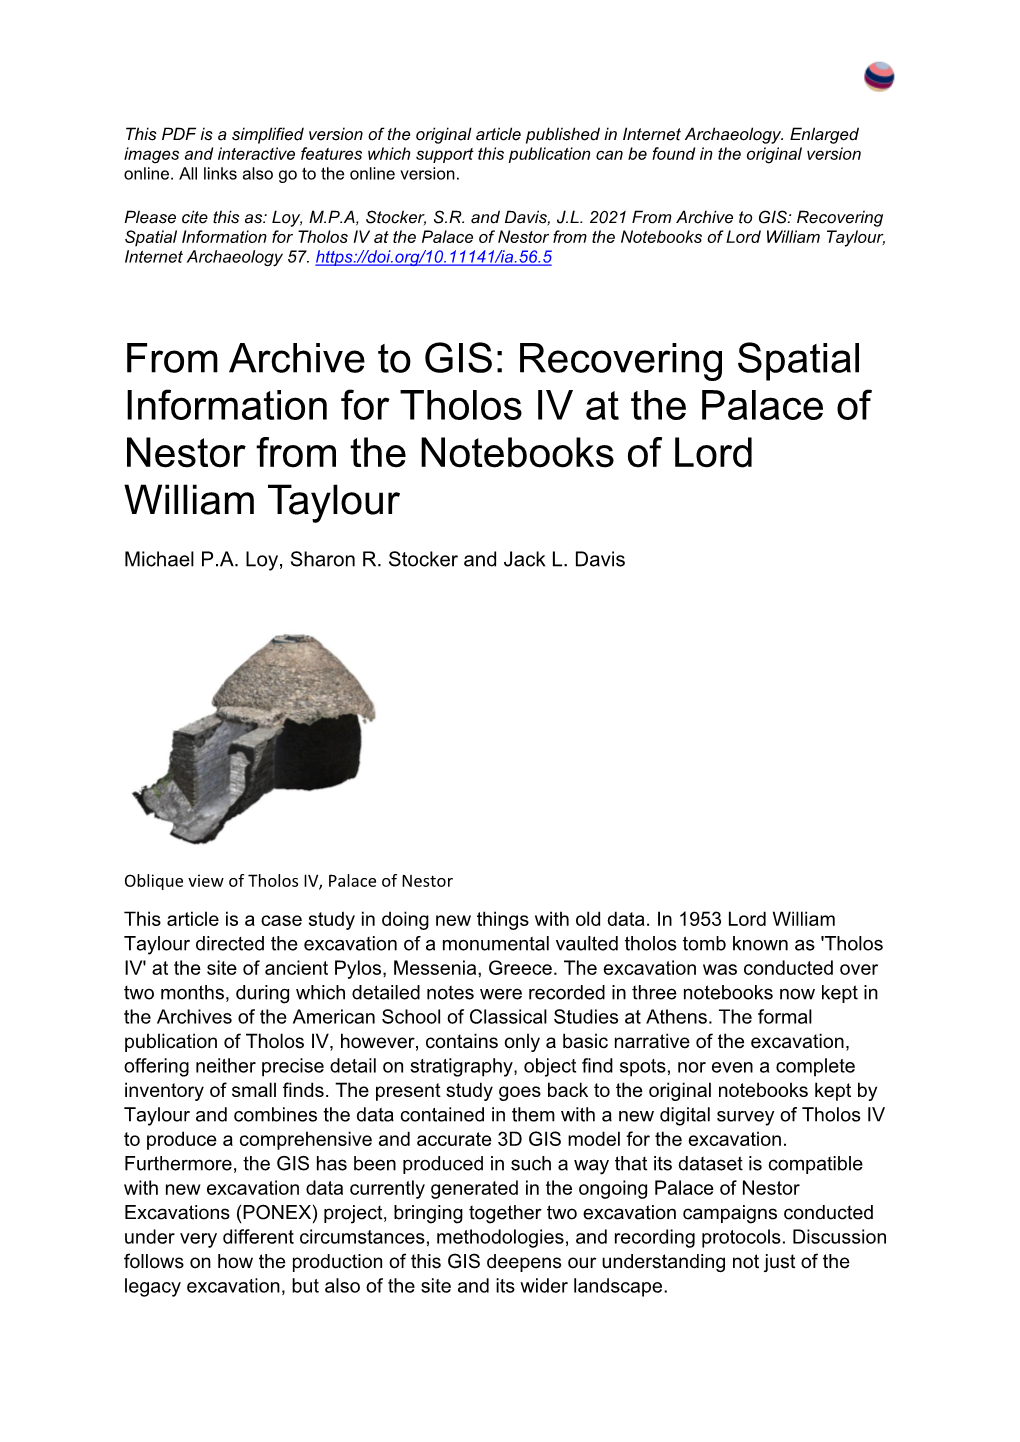 From Archive to GIS: Recovering Spatial Information for Tholos IV at the Palace of Nestor from the Notebooks of Lord William Taylour, Internet Archaeology 57